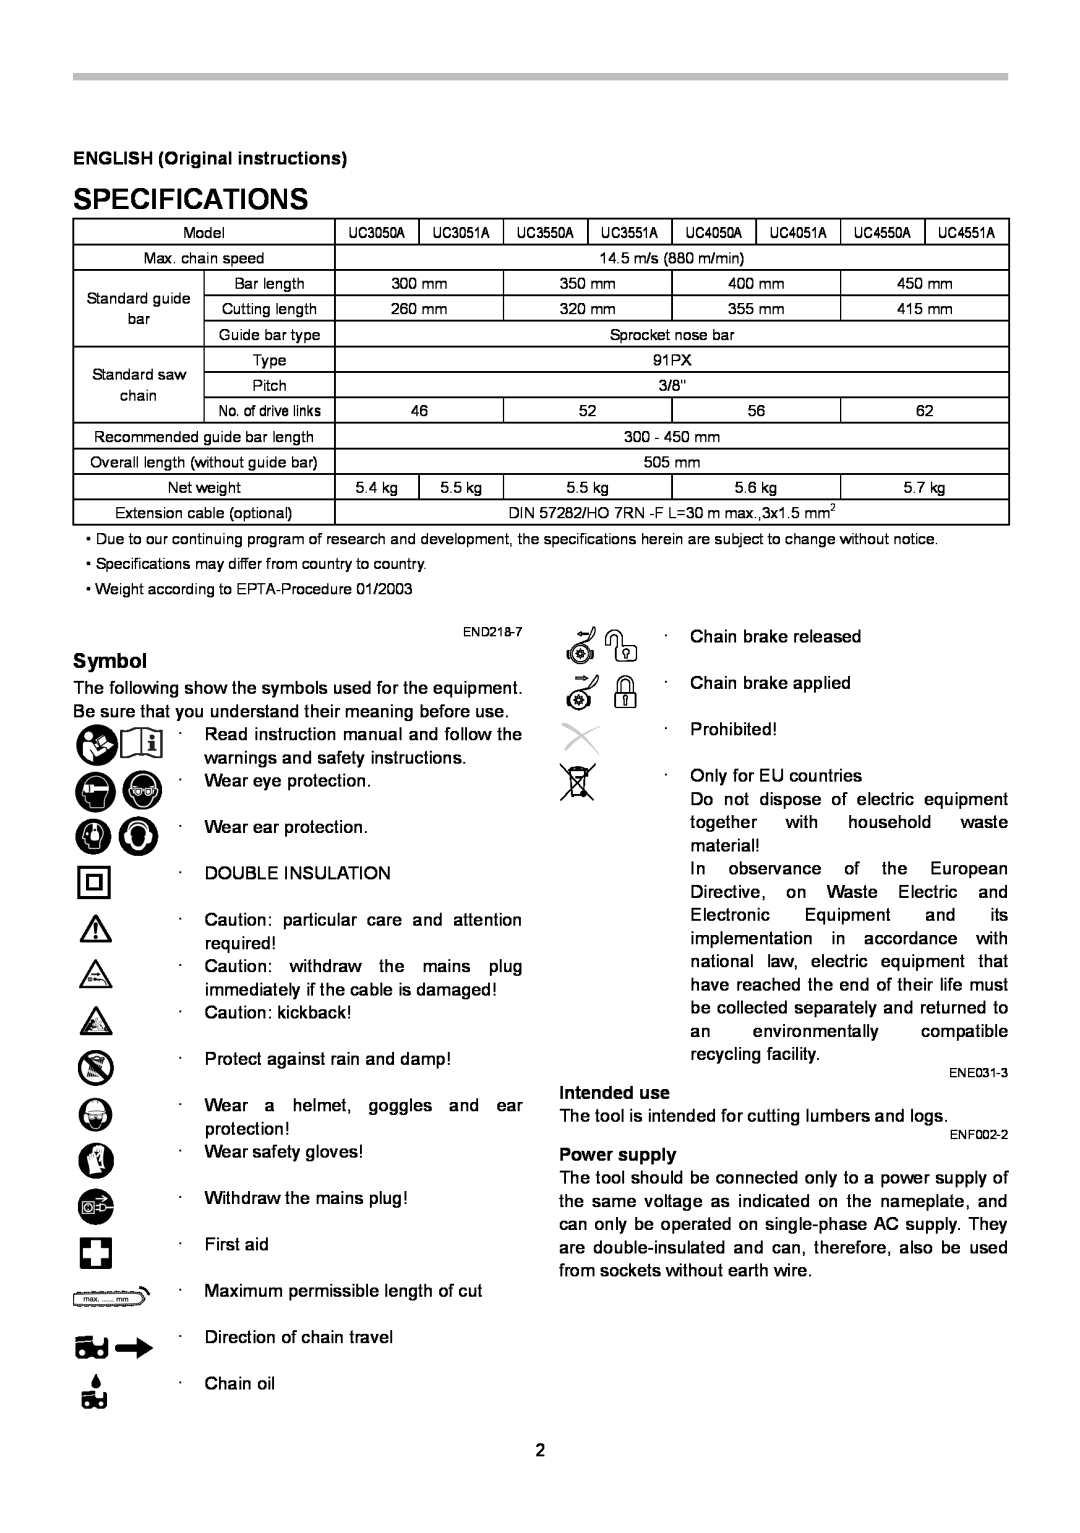 Makita UC4051A, UC4050A, UC4550A, UC4551A, UC3551A, UC3550A, UC3050A, UC3051A instruction manual Specifications, Symbol 